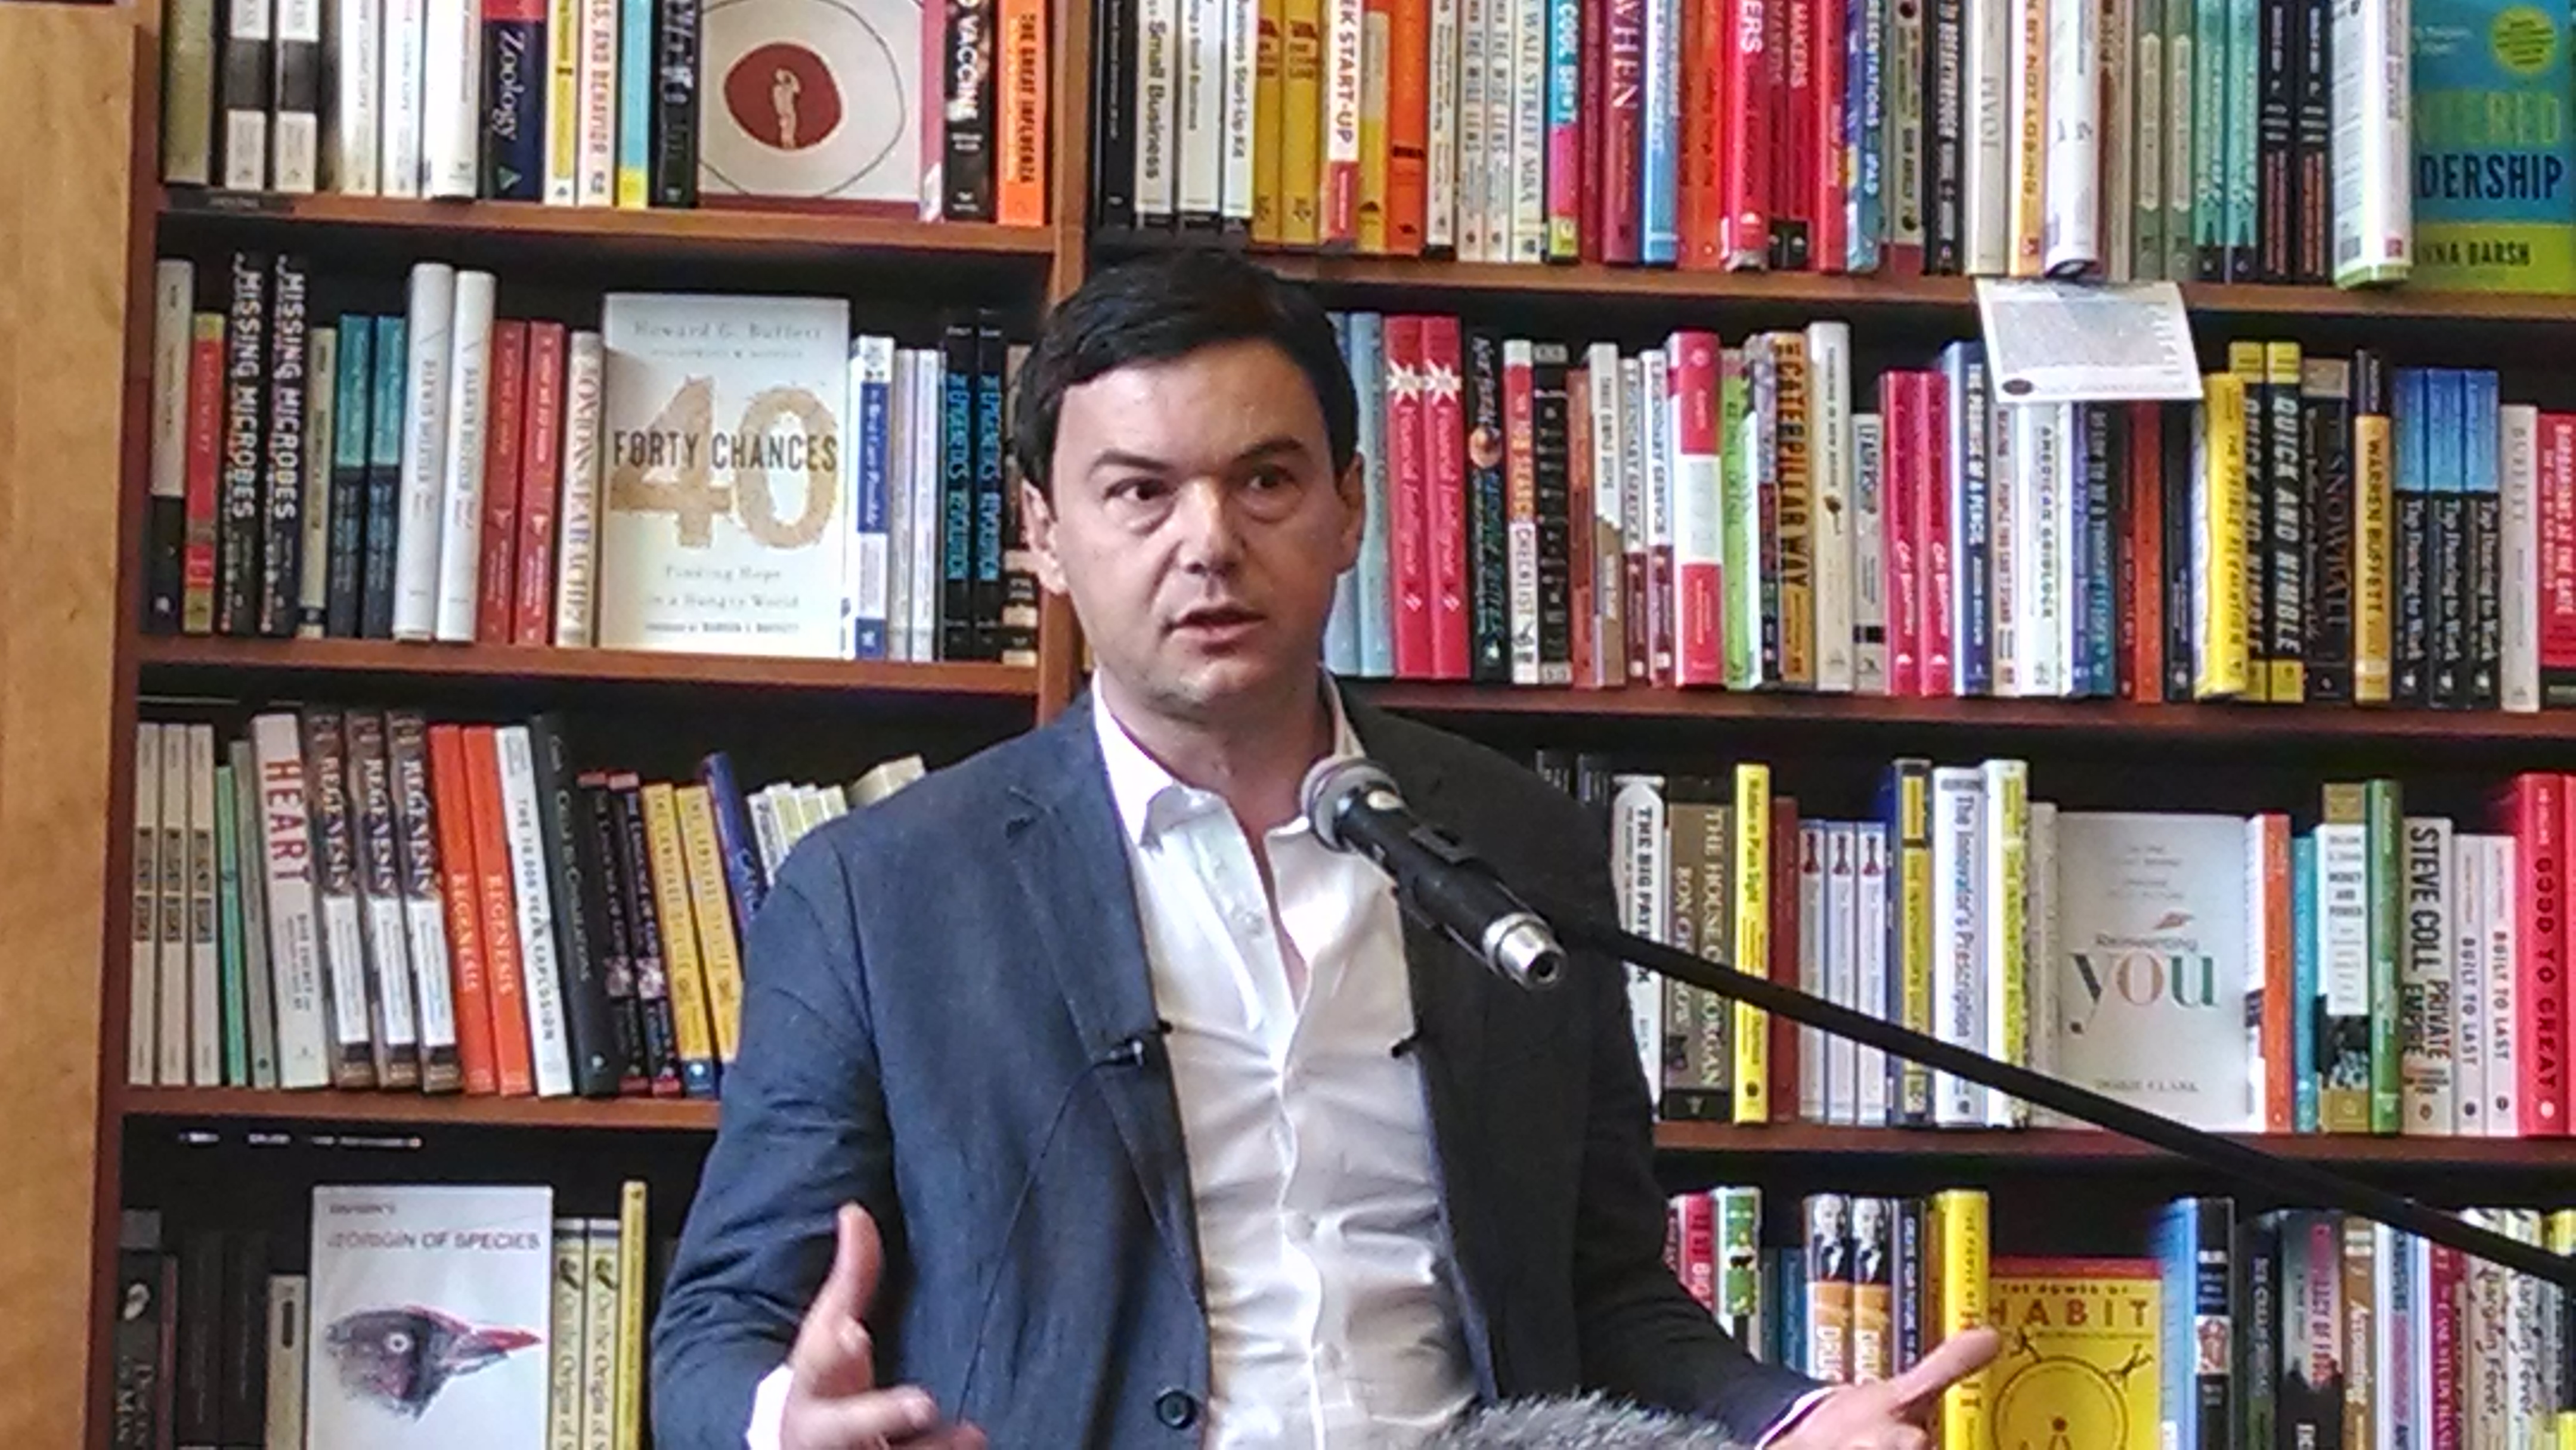 A picture of Thomas Piketty in front of a bookcase